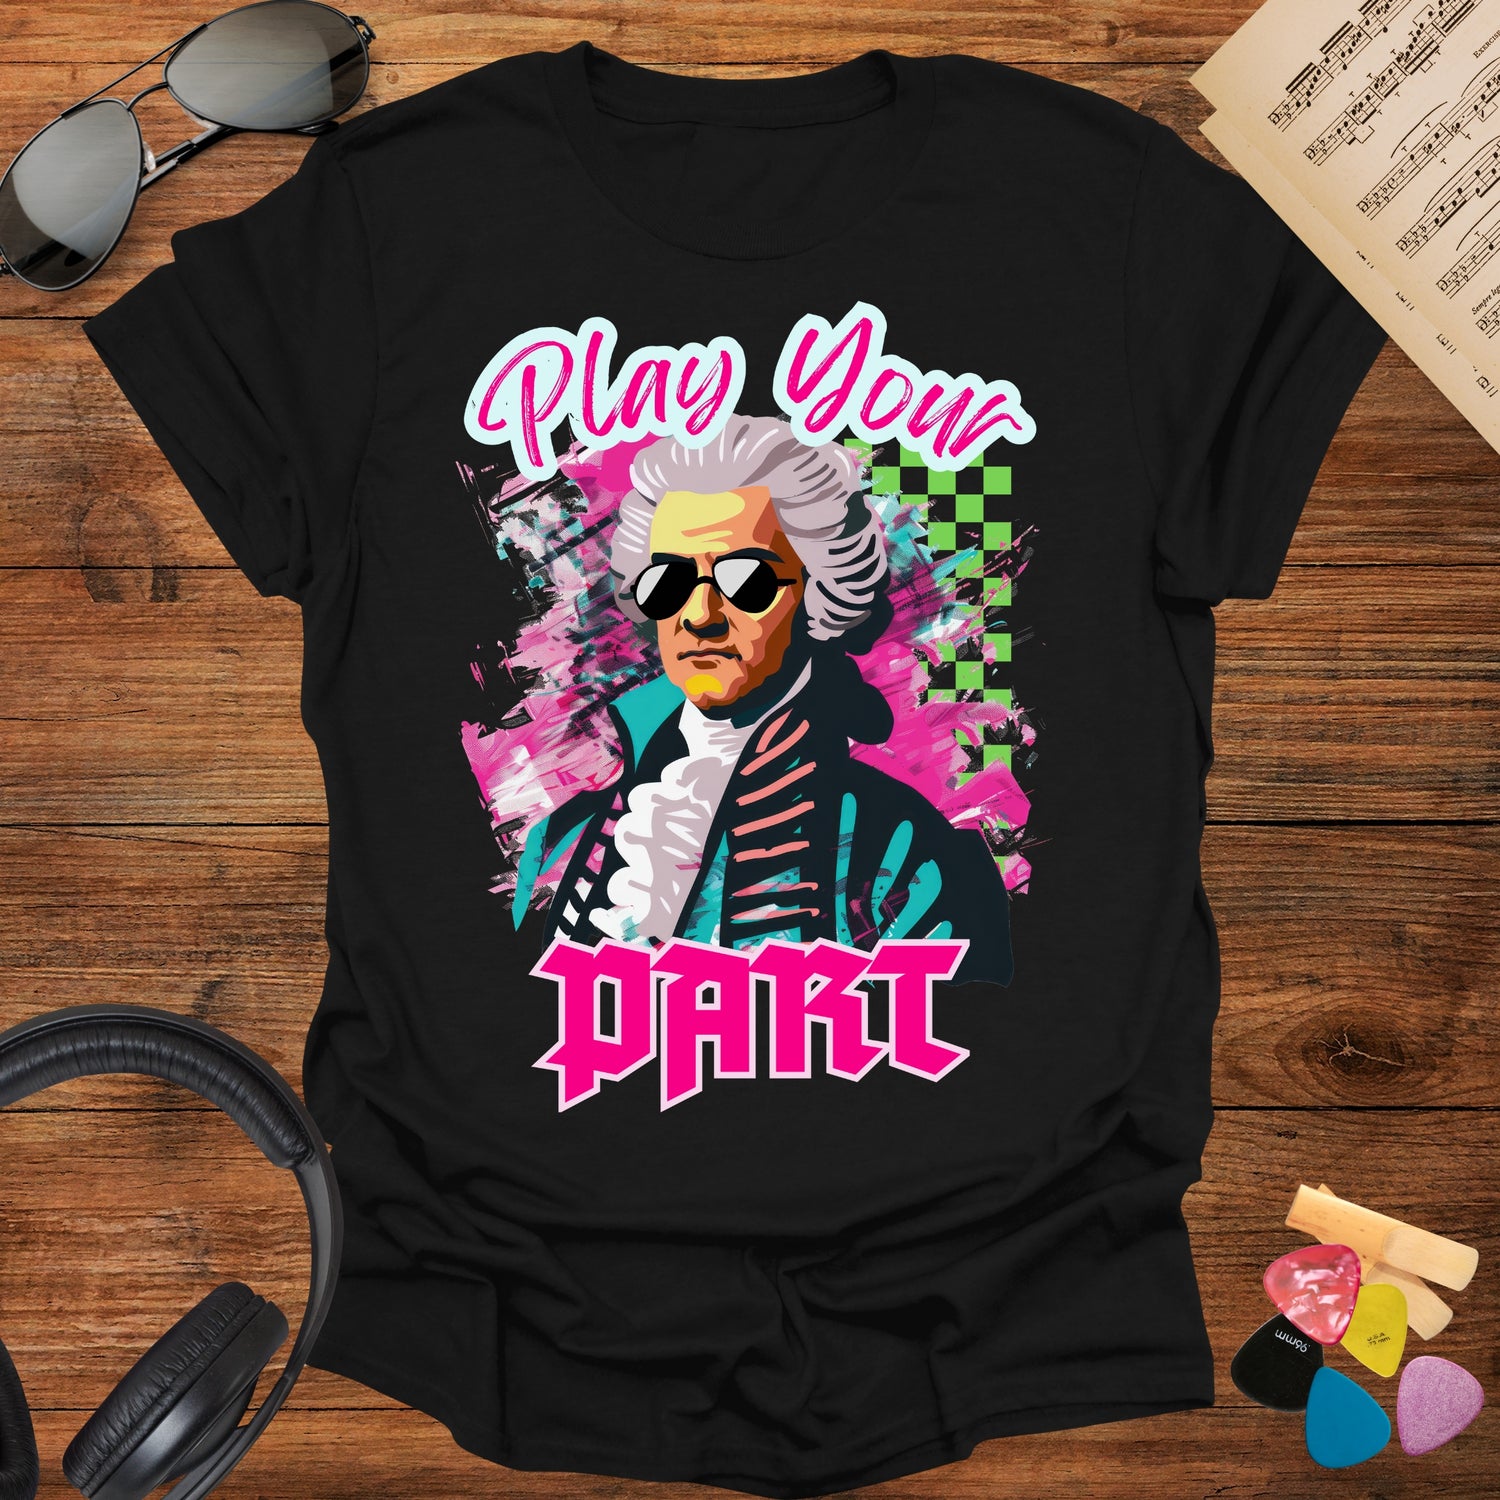 Fun and Classic Music Lover Tees